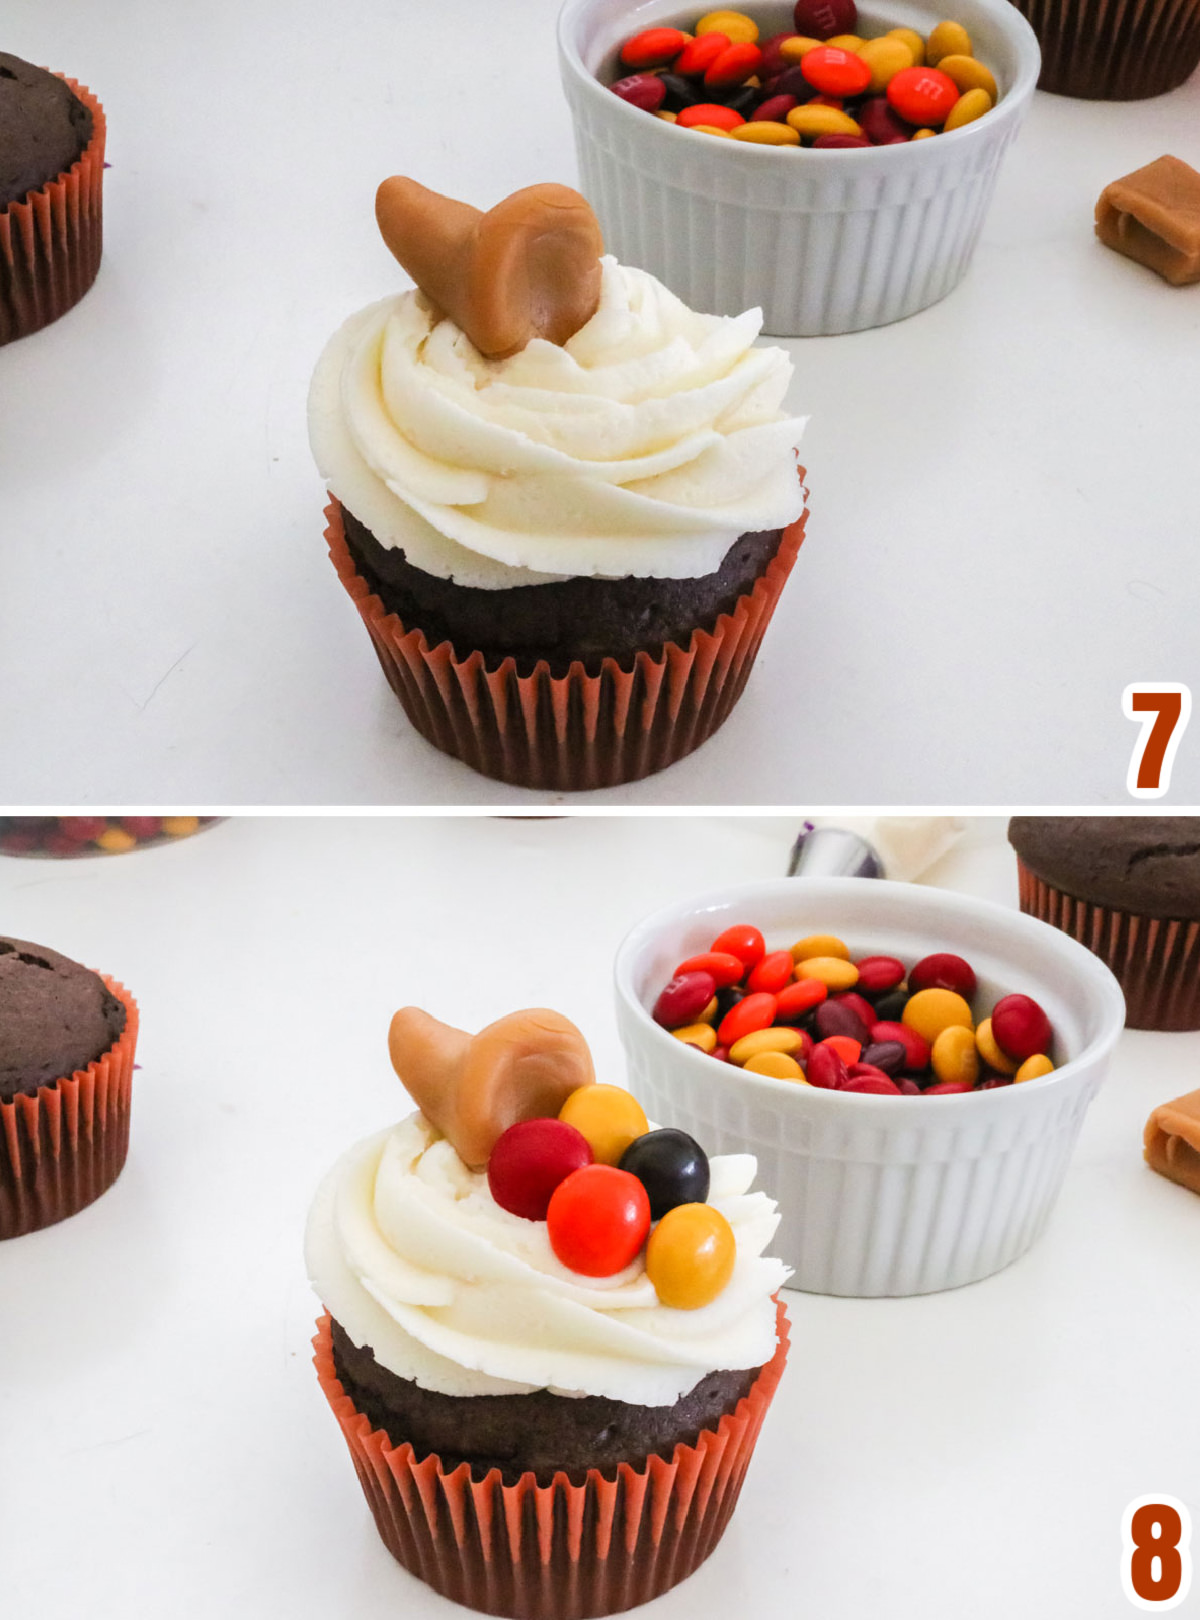 Collage image showing how to decorate the cupcake with the caramel cornucopia and the M&M's.